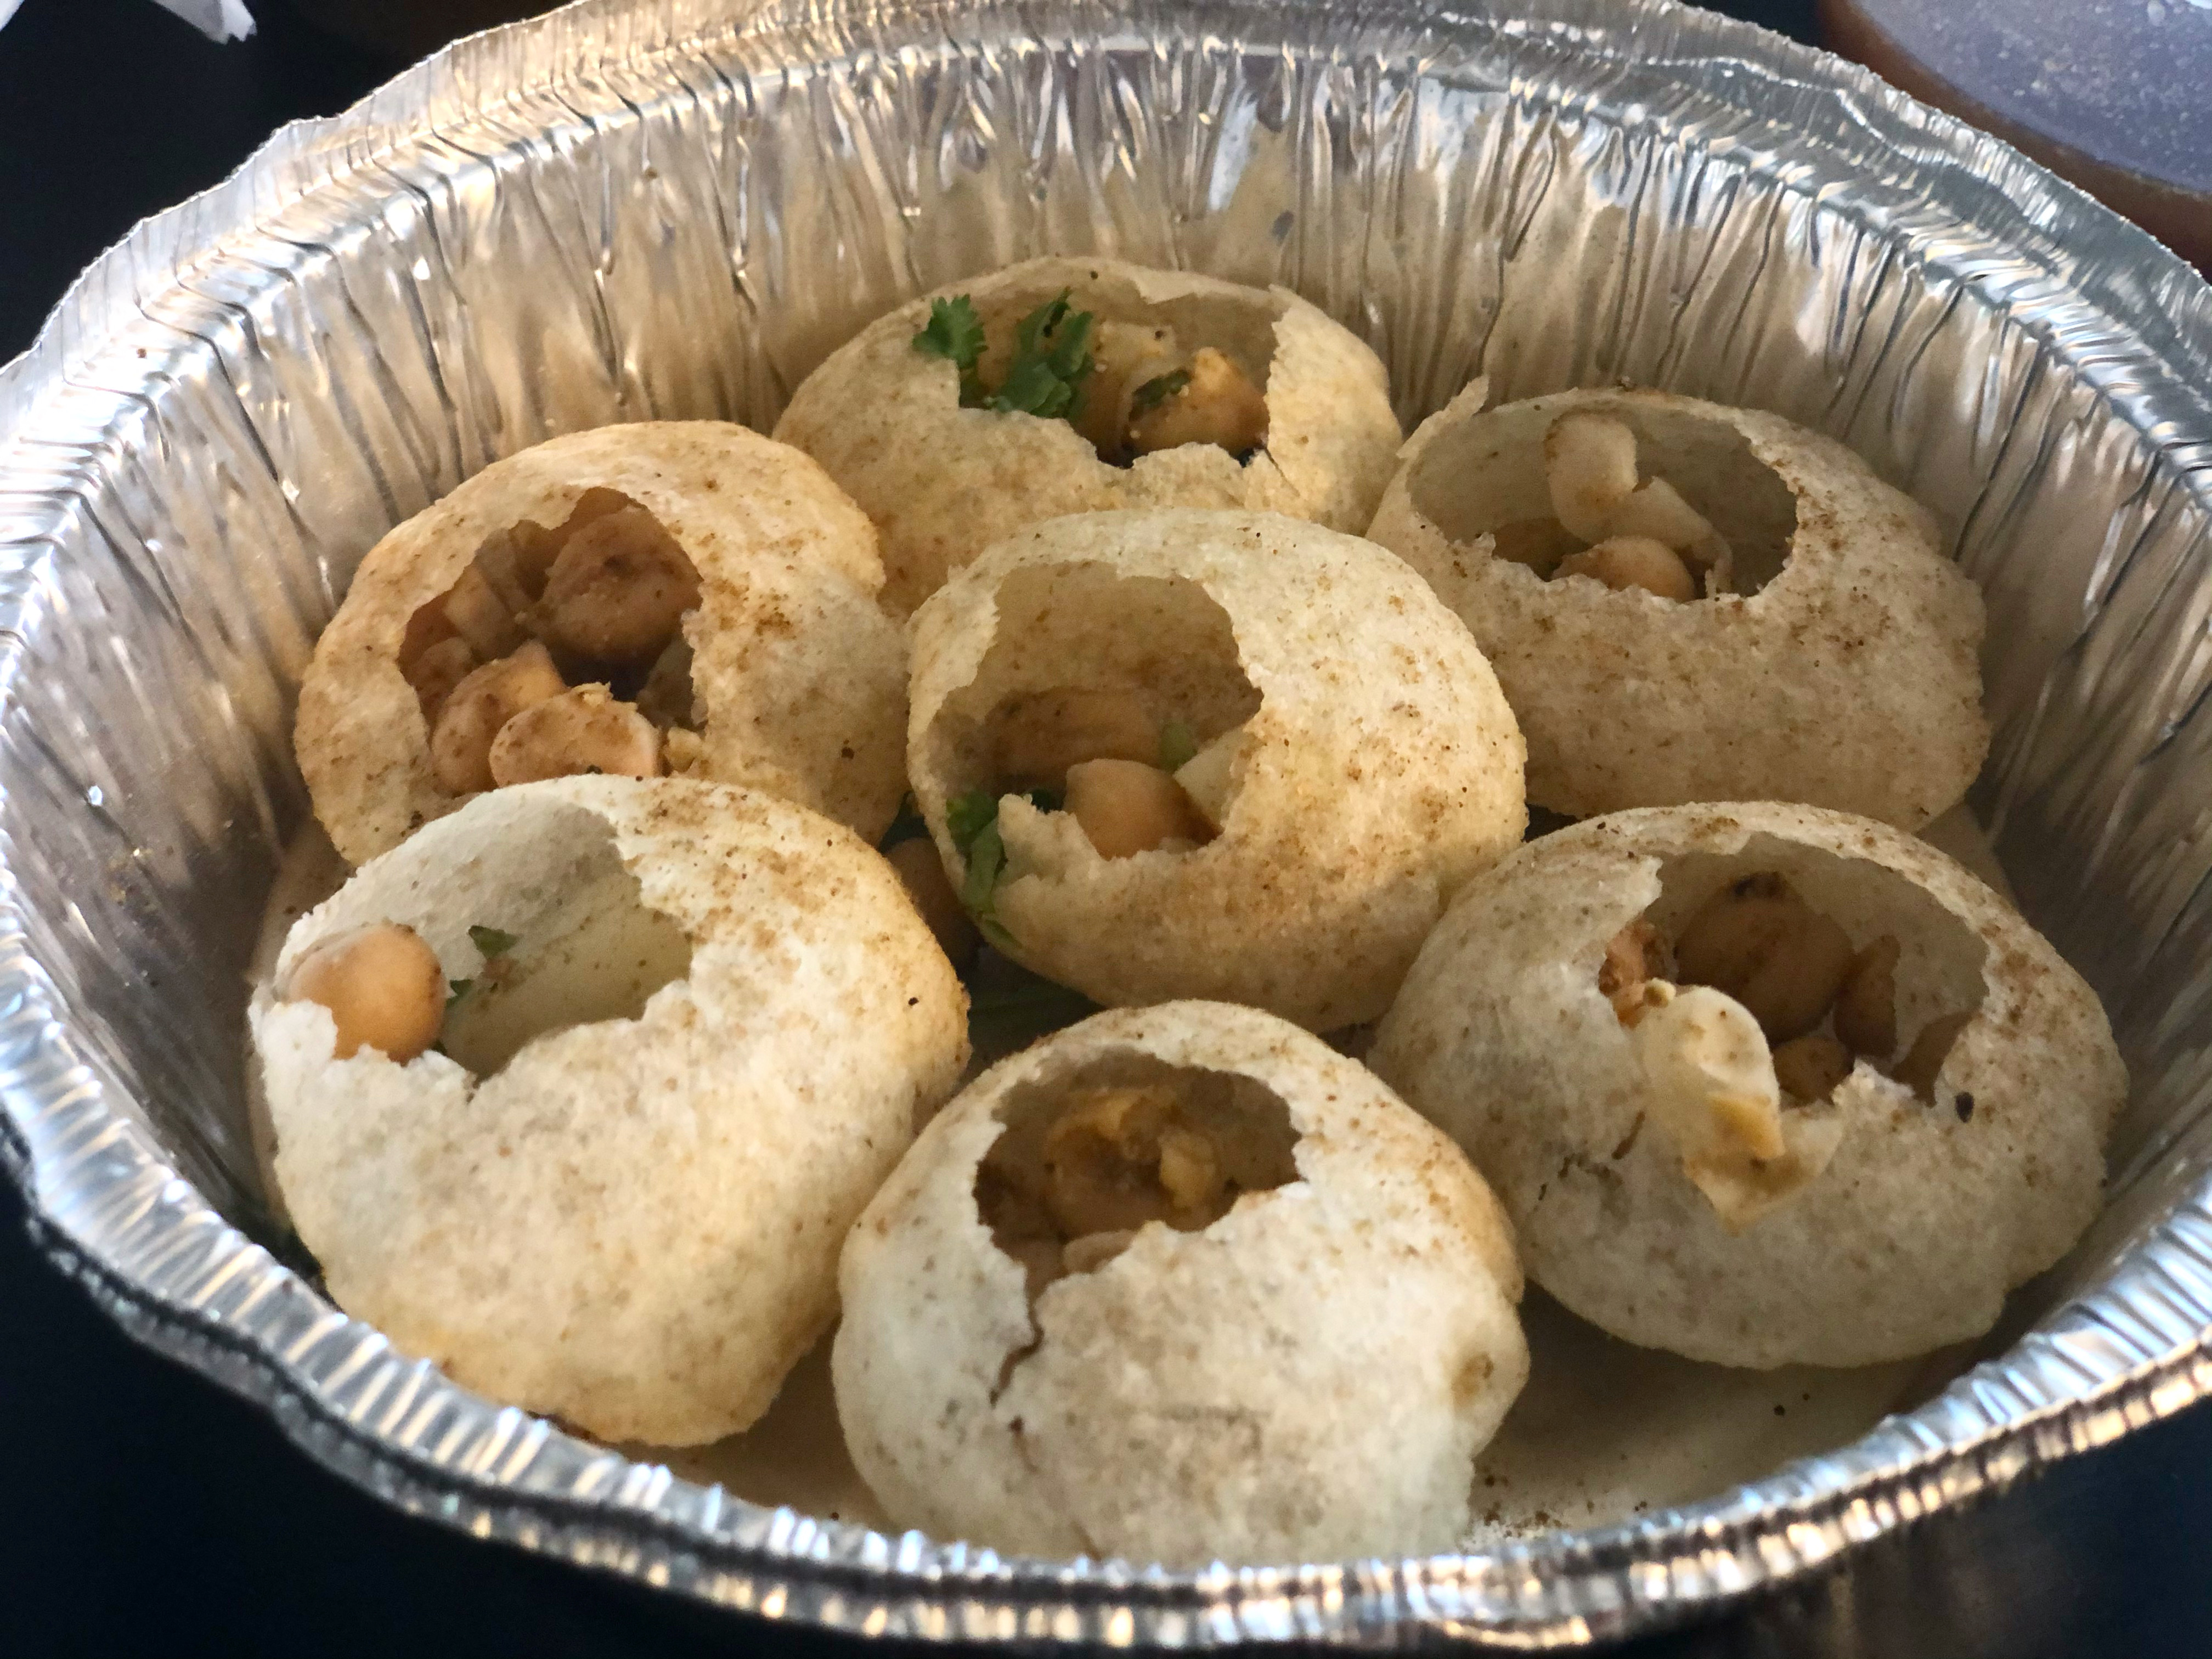 Seven small spheres are cracked open at the top revealing chickpeas and cilantro in a circular tin carryout container. Photo by Alyssa Buckley.